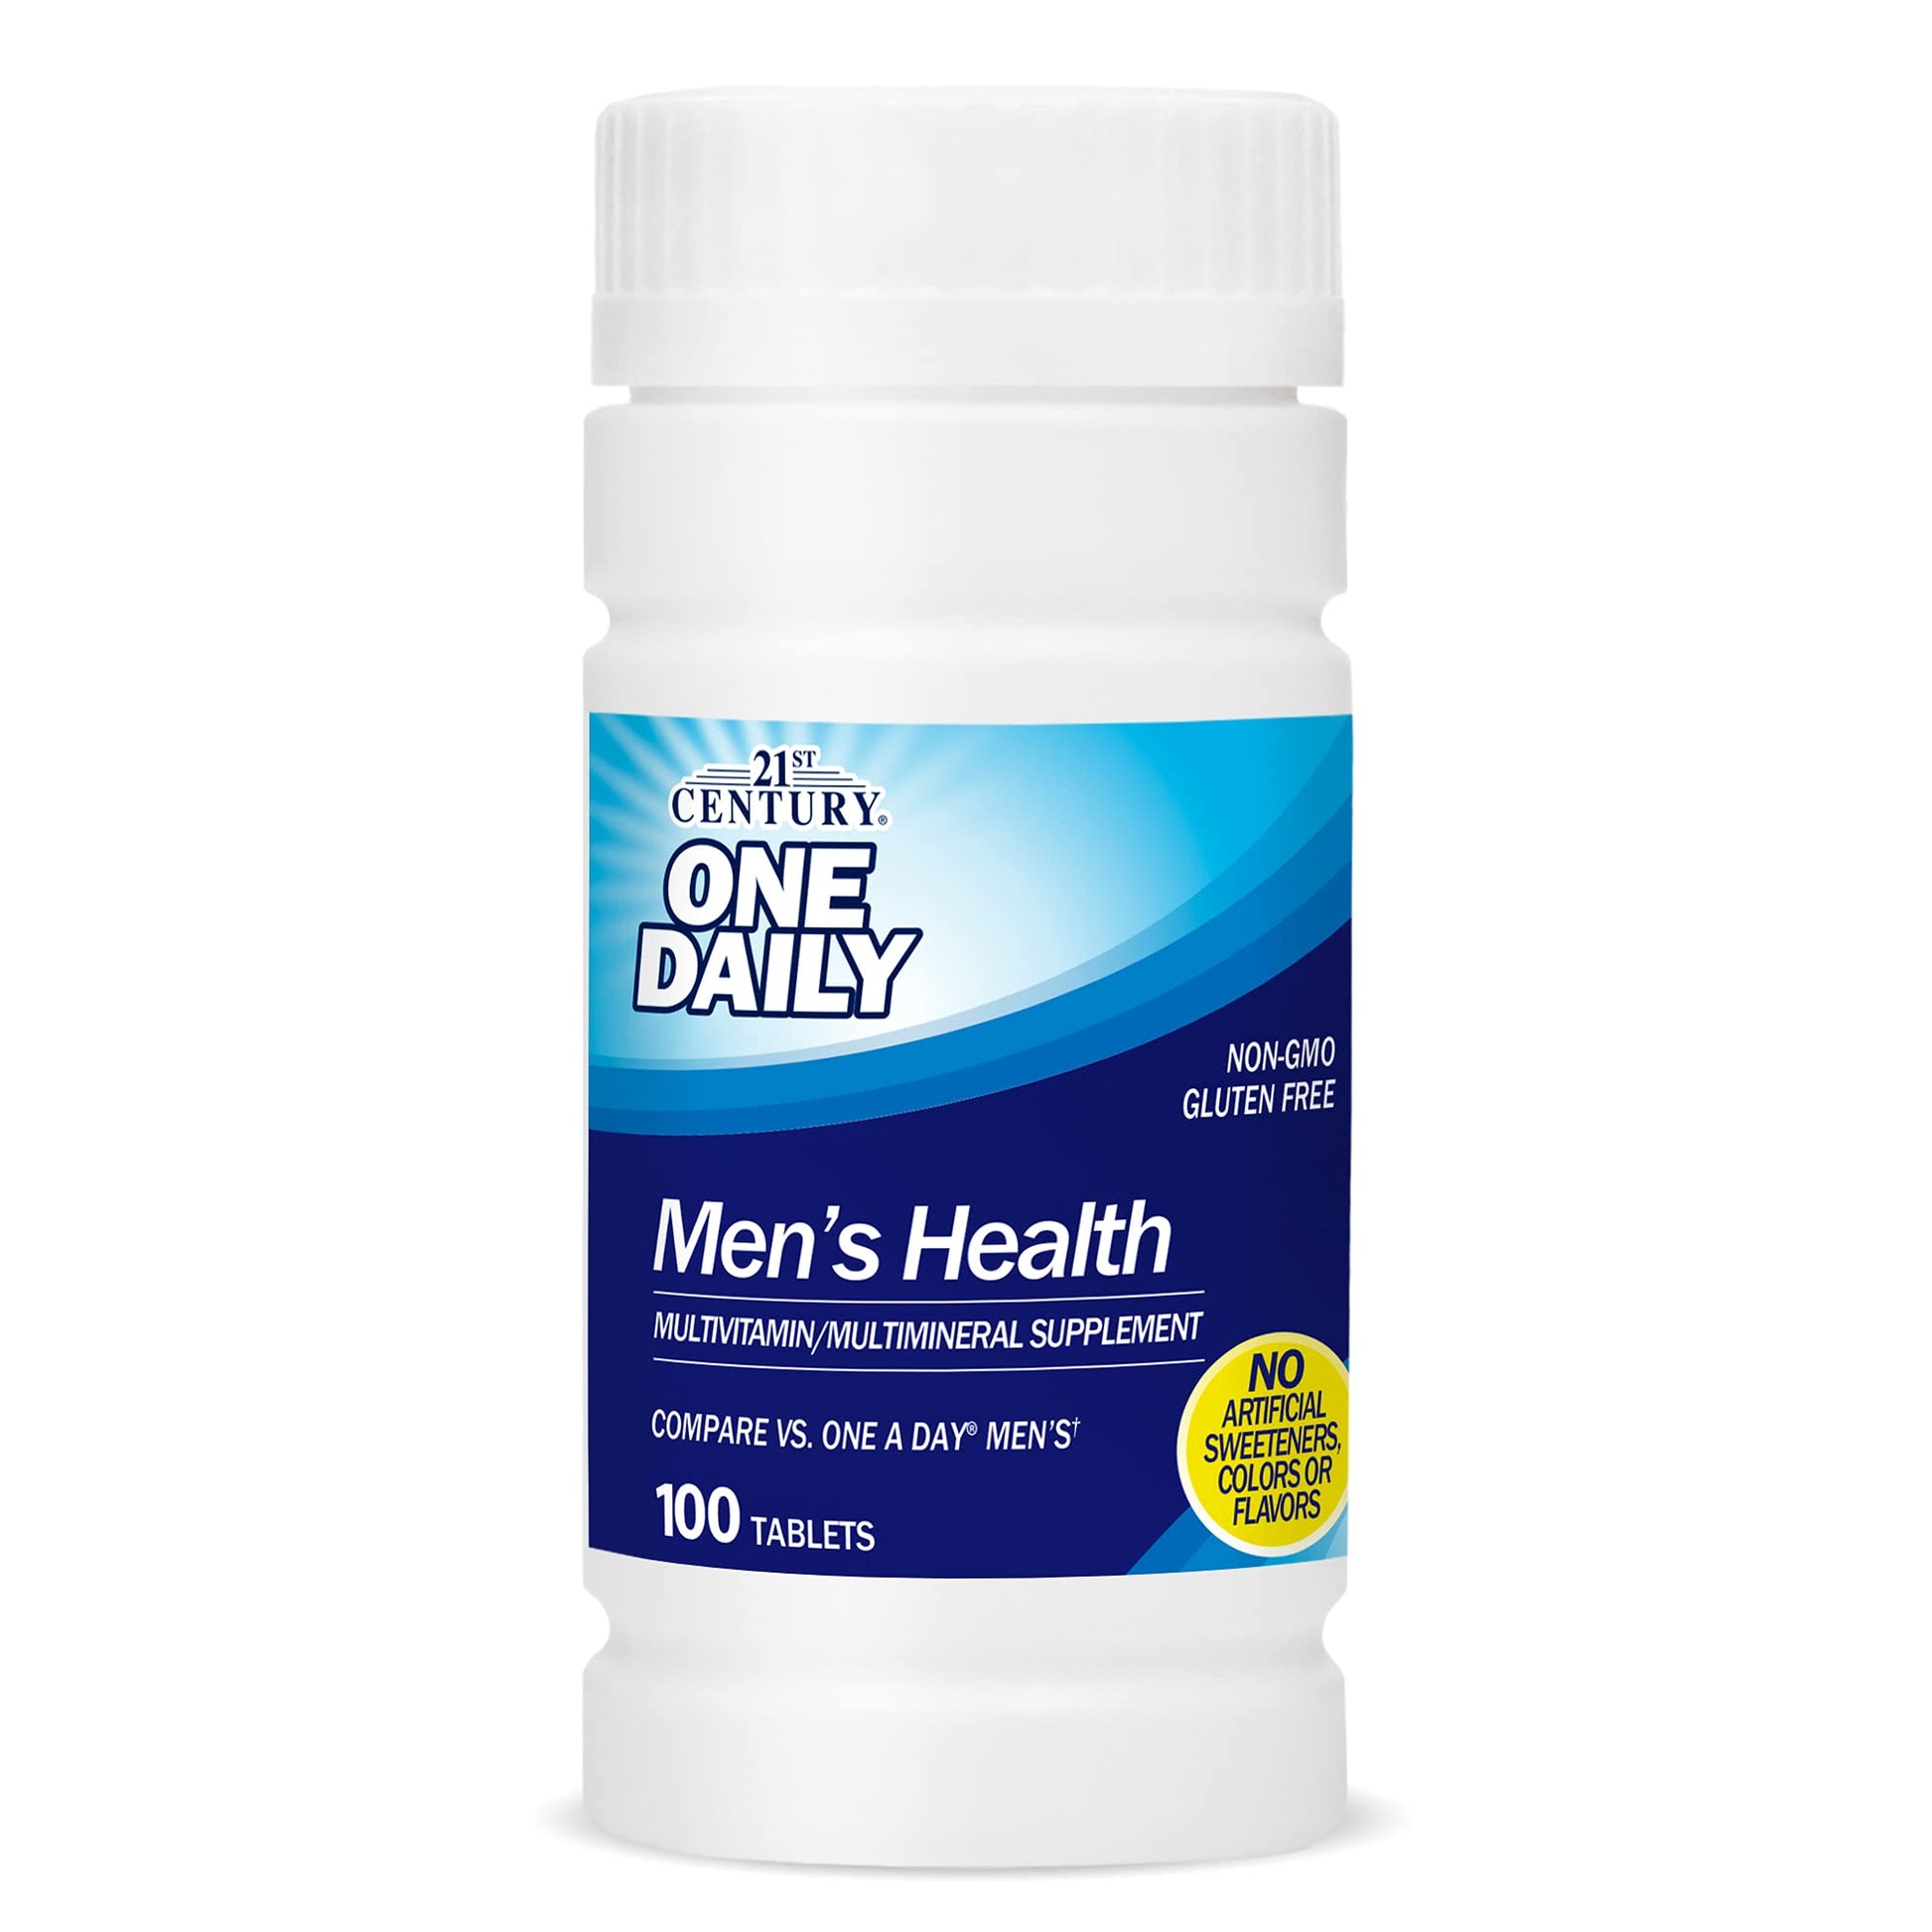 21st Century One Daily Men's Health Multivitamin/Multimineral Supplement | Similar to One A Day Men | 100 Tablets - Ome's Beauty Mart